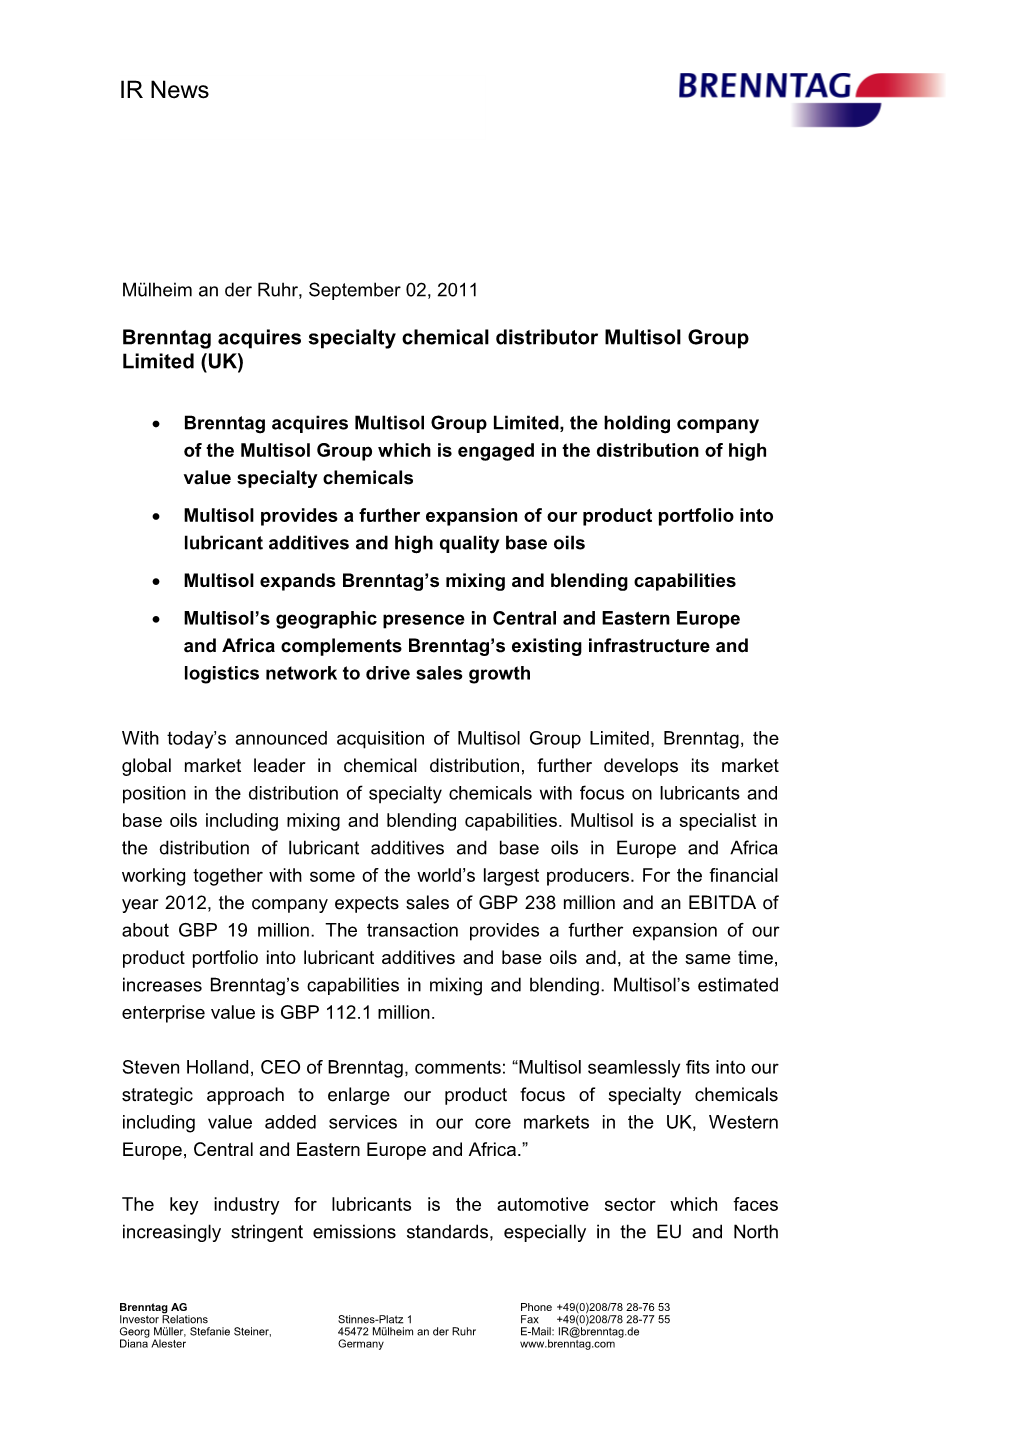 Brenntag Acquires Specialty Chemical Distributor Multisol Group Limited (UK)